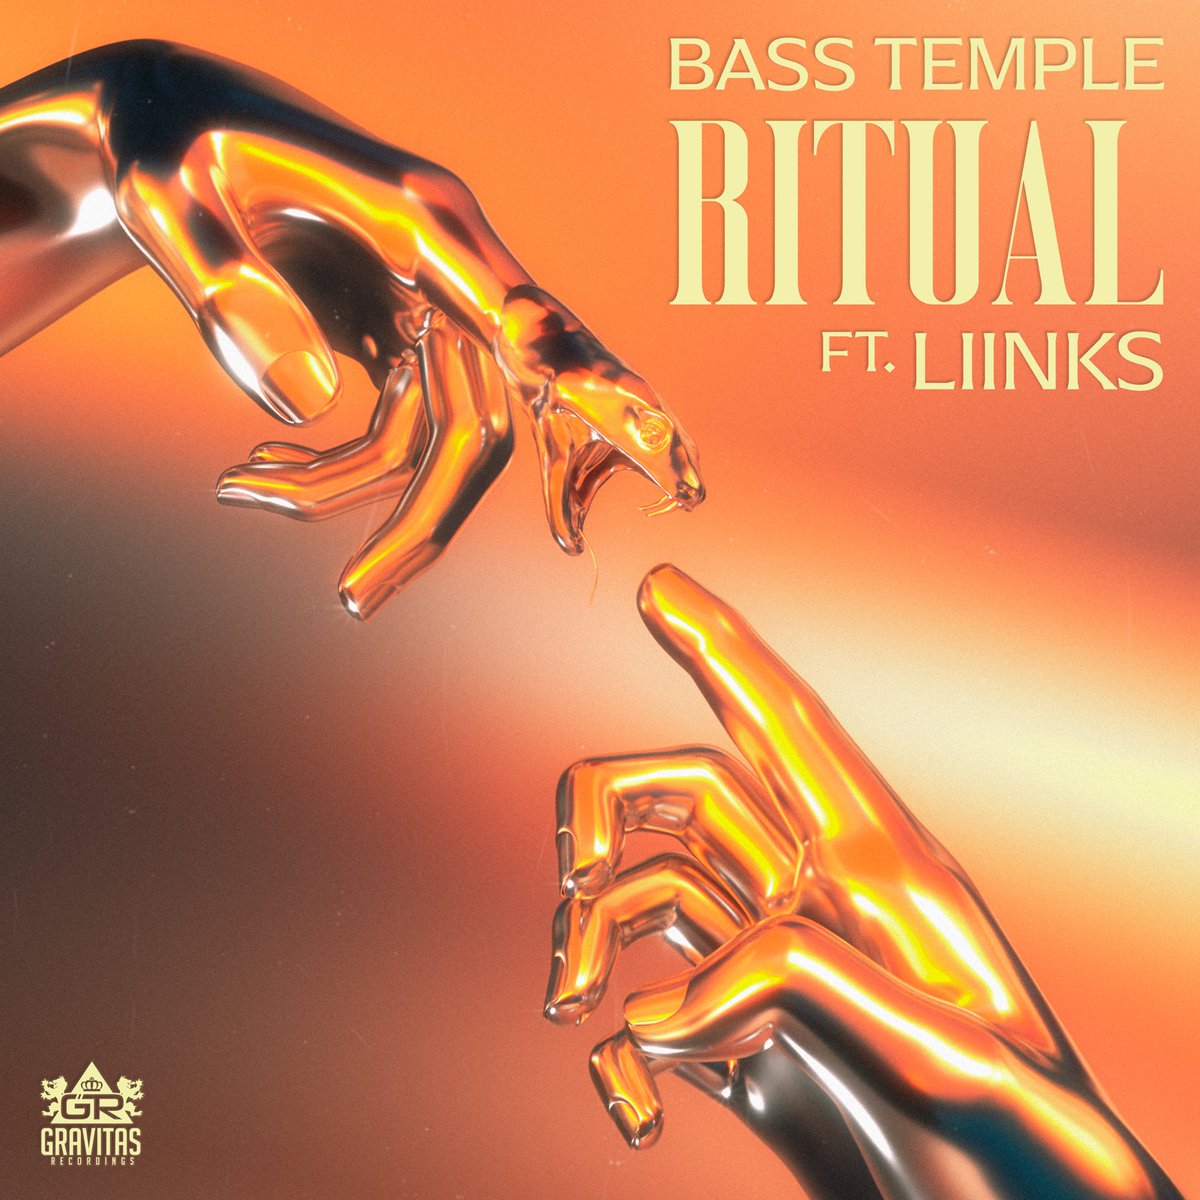 “Ritual” from @basstemplemusic and @weareliinks out next Friday! Link below to presave ✨ basstemple.fanlink.to/ritual